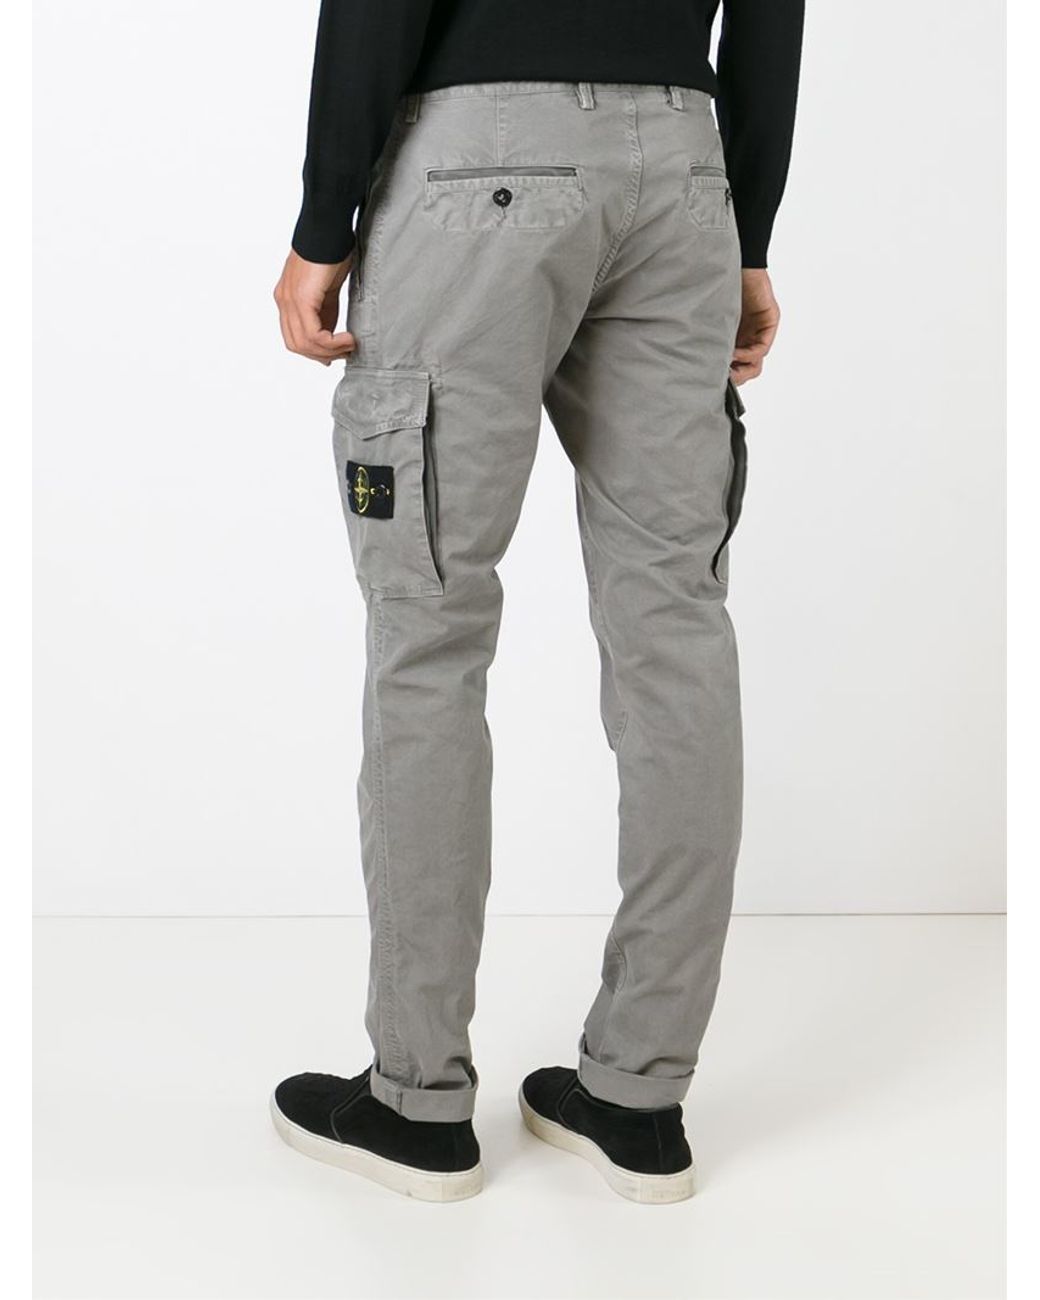 Stem neighbor grill Stone Island Slim Fit Cargo Trousers in Gray for Men | Lyst